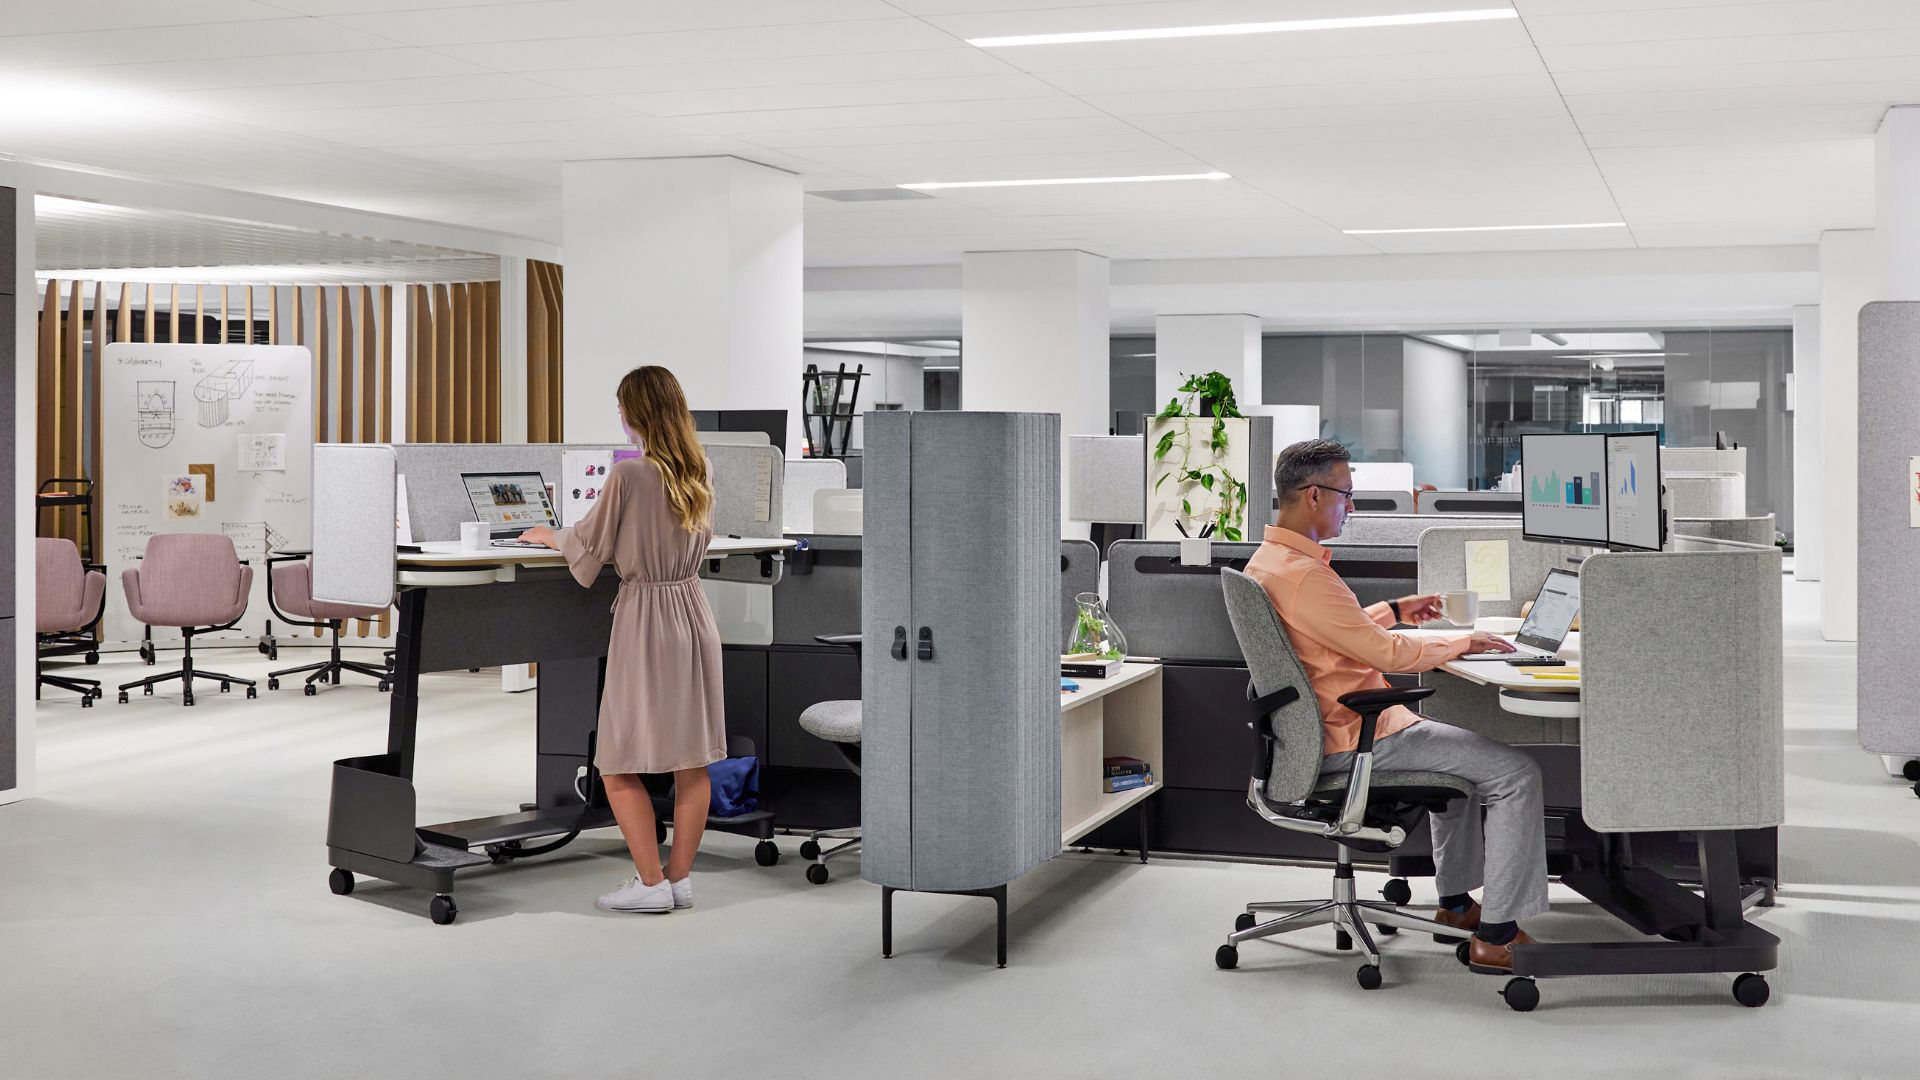 Contemporary Office Interiors - Designed for an ergonomic workplace,  designed for you. // Maars Living Walls M923 walls allow you to easily  customize your own colour, combination, and function of walls, creating